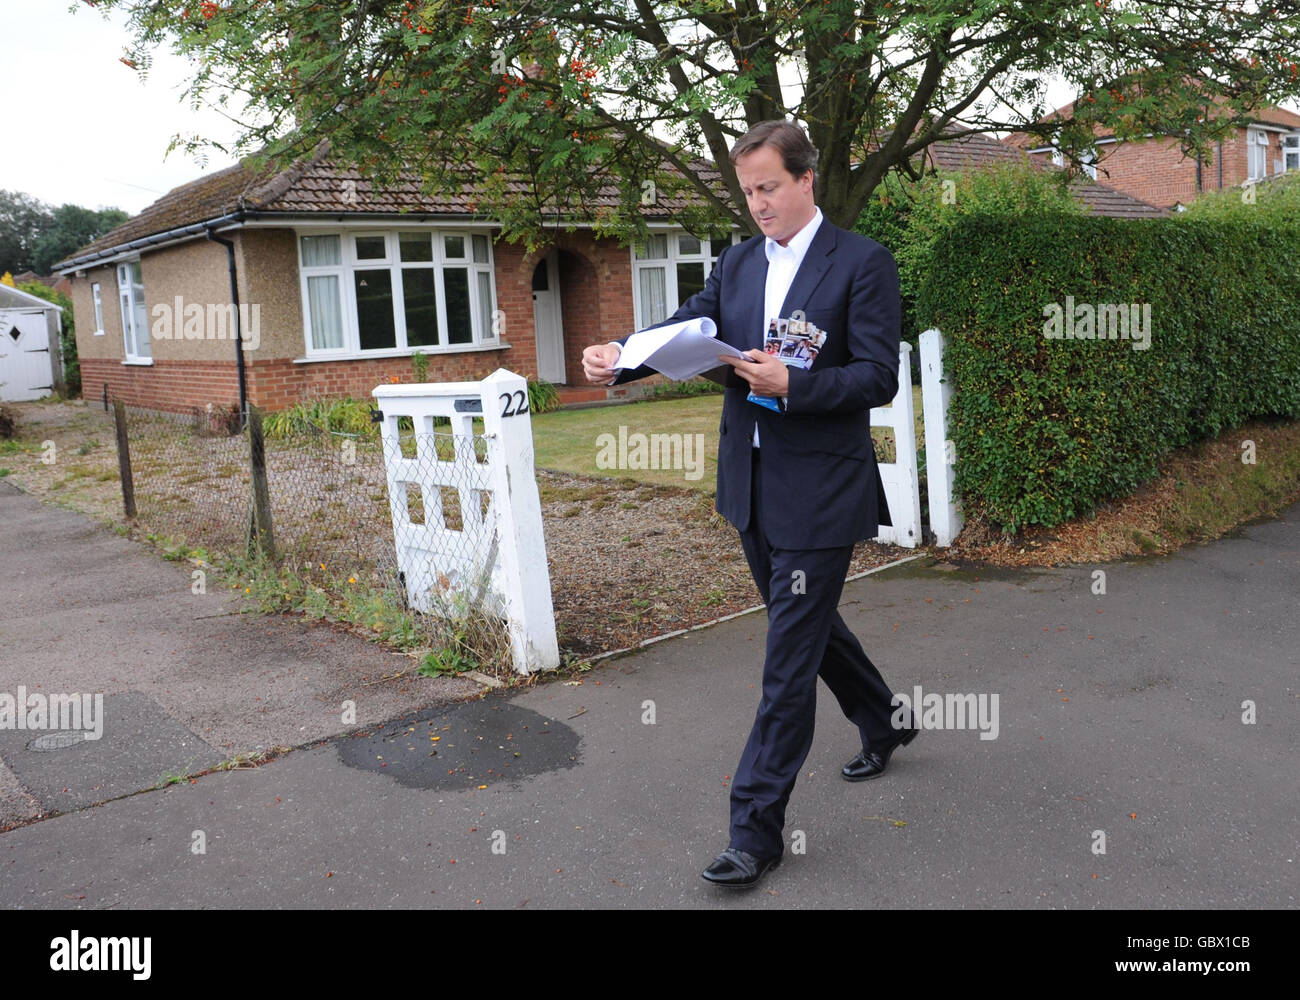 Conservative leader David Cameron canvasses voters in Norwich, where he was campaigning for the Norwich North by-election. Stock Photo